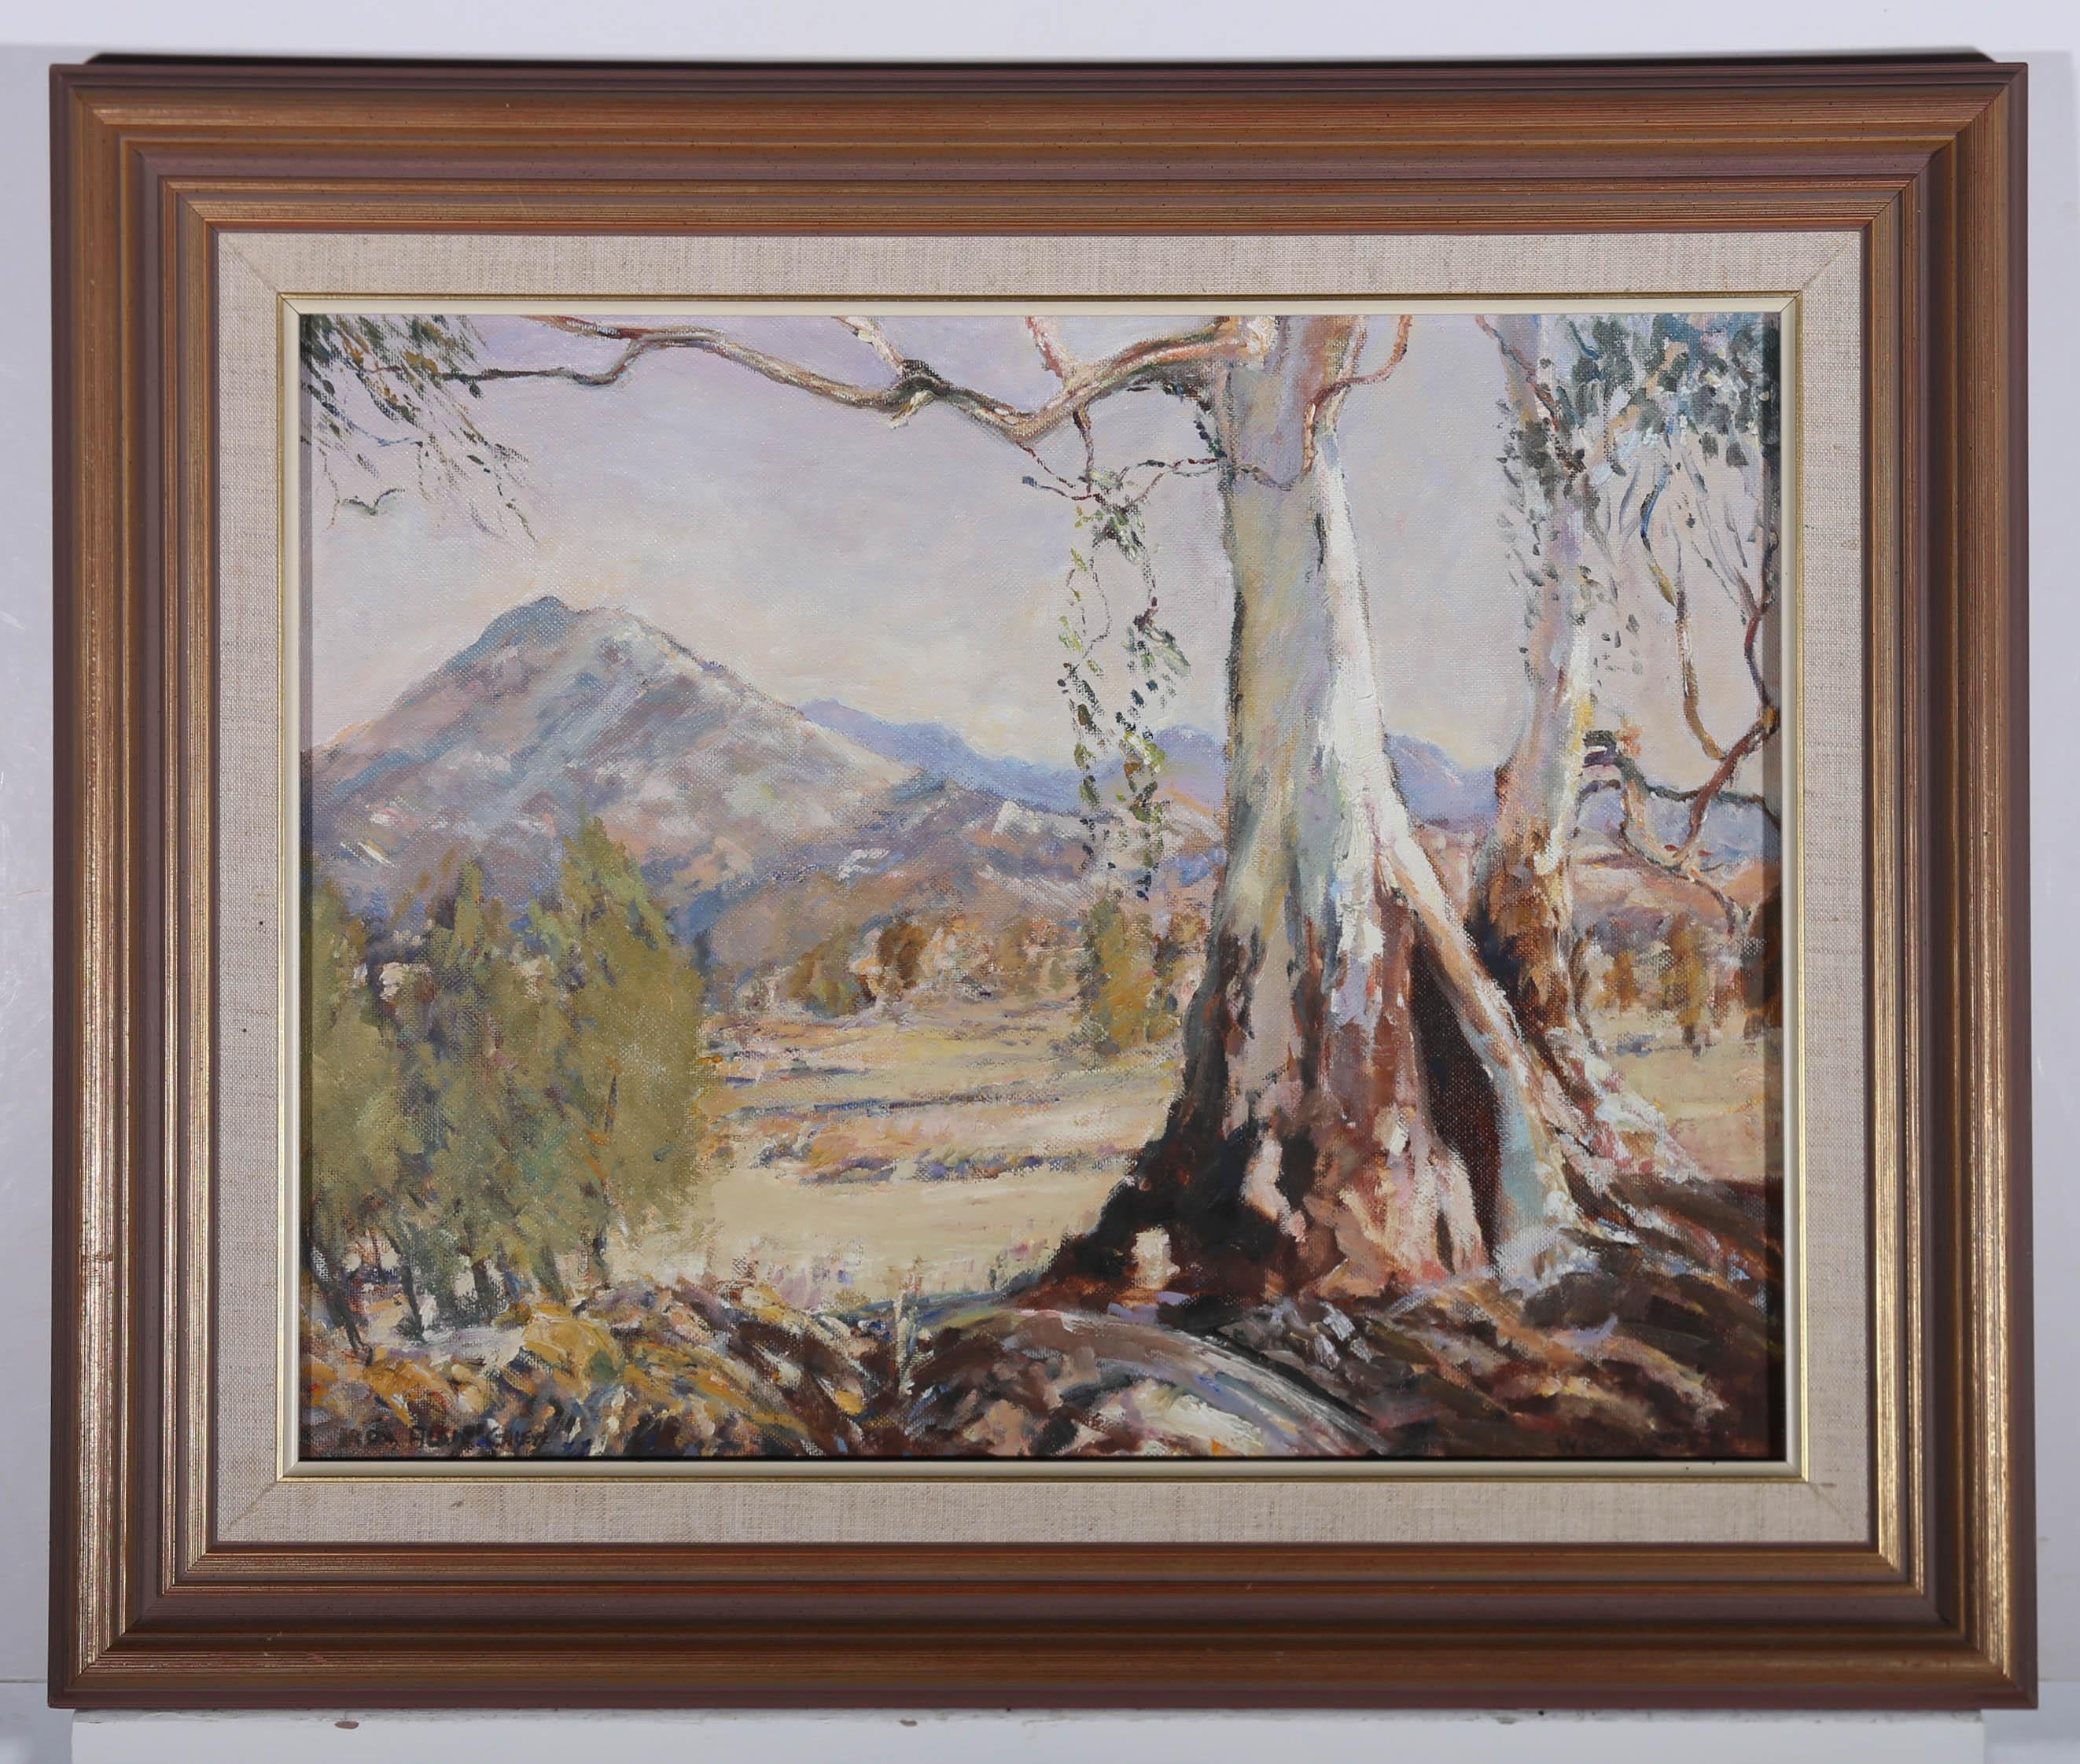 An impressionistic landscape showing two heavy rooted eucalyptus trees framing one of Australia's beautiful Southern mountain ranges. Indistinctly signed to the lower right. Elegantly presented in a complimenting contemporary style frame and soft